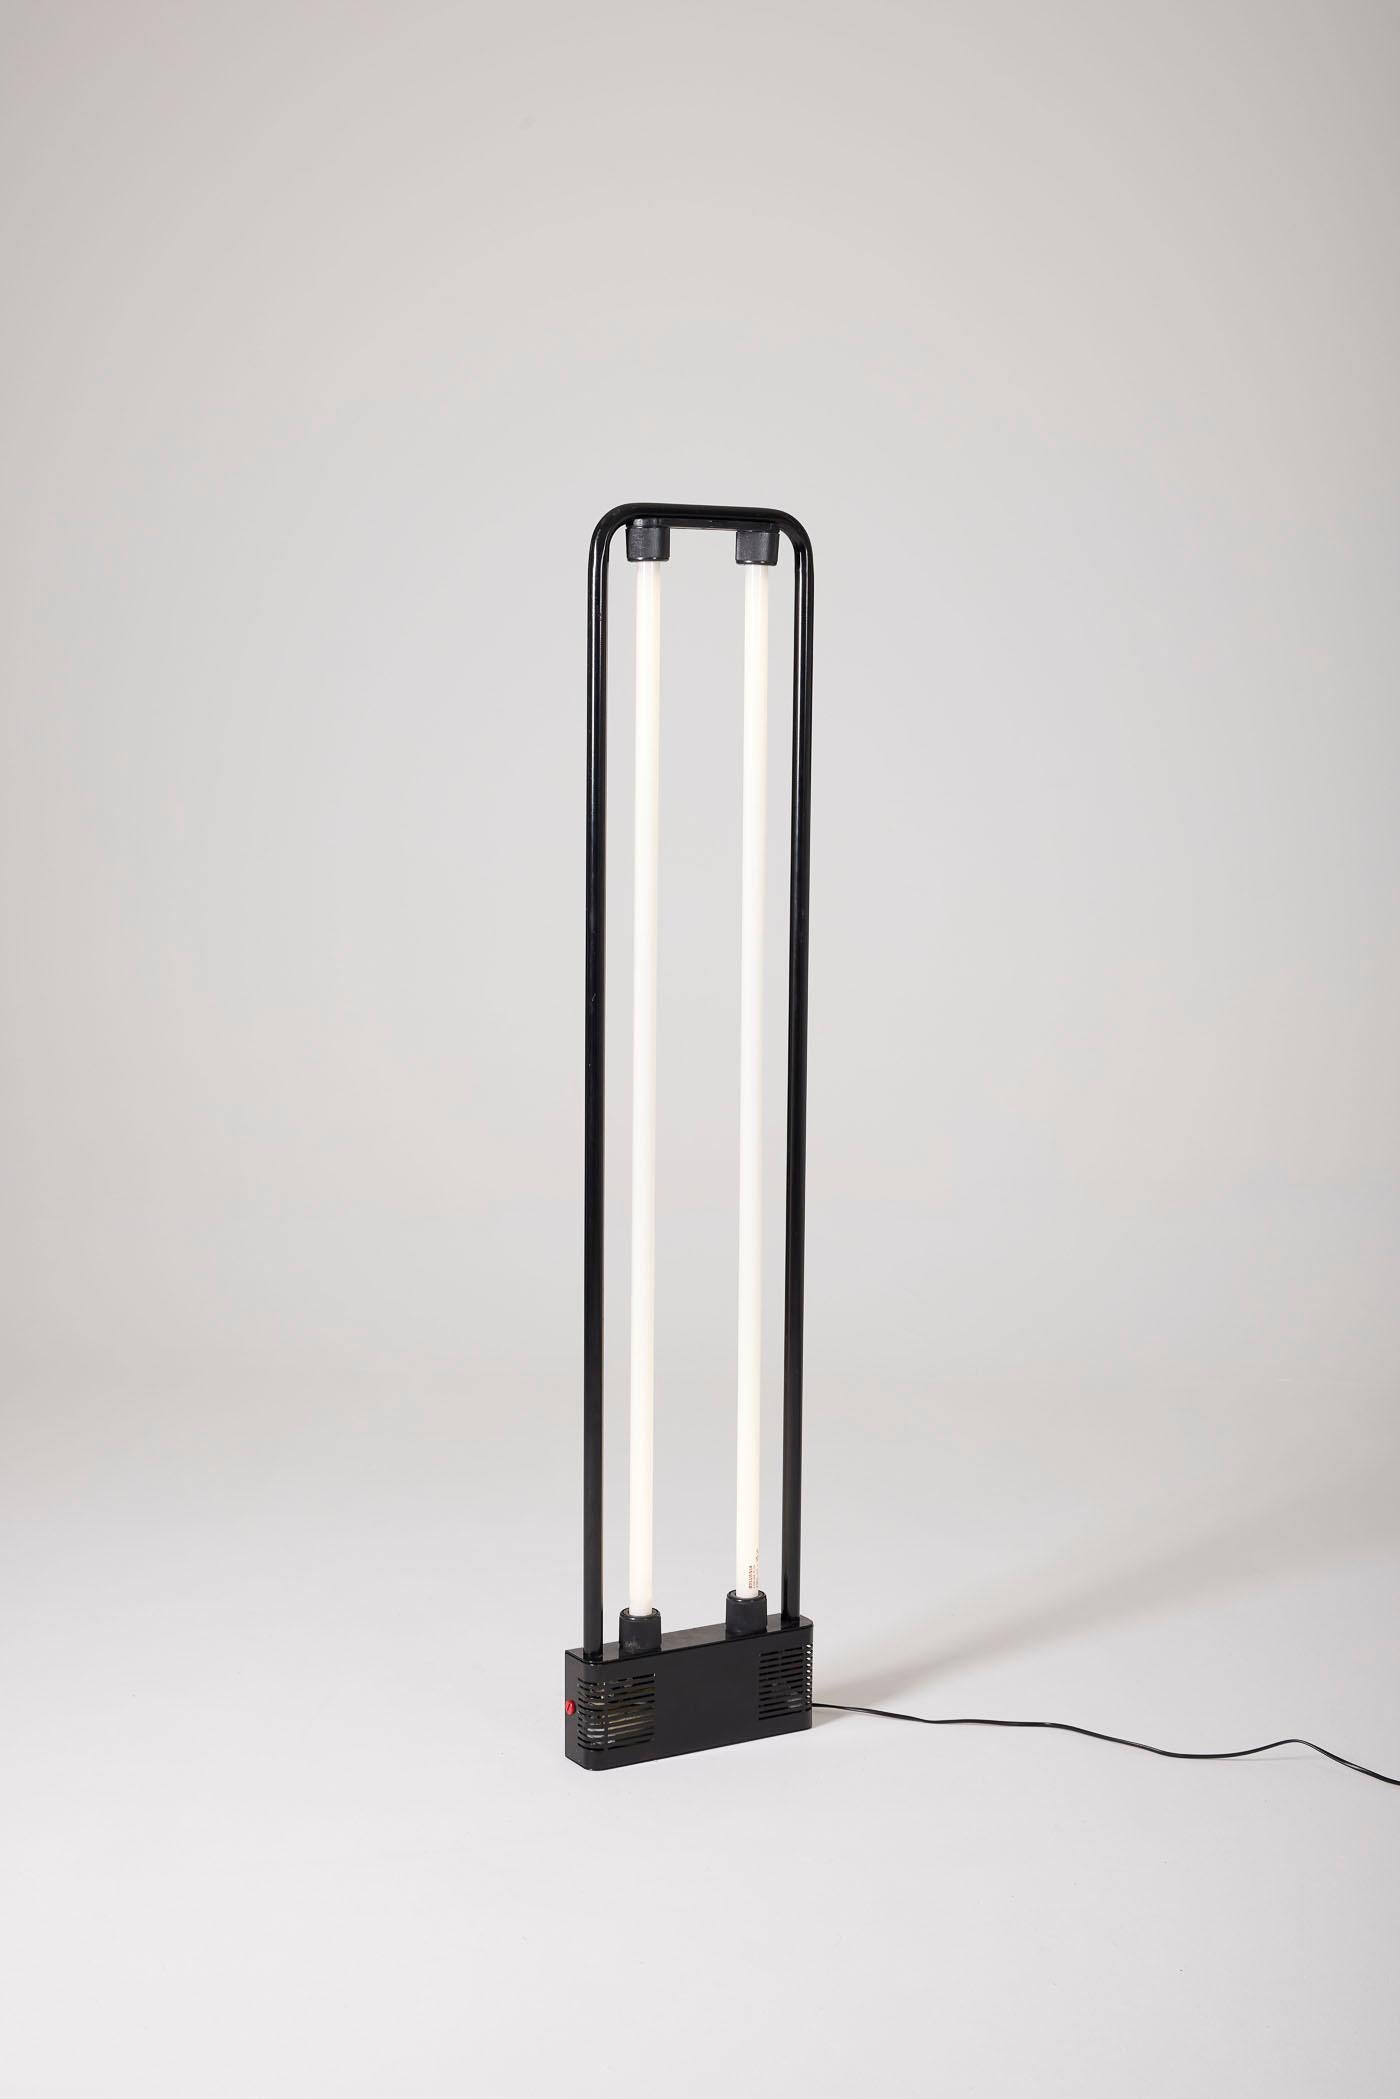 Black Zerbetto model floor lamp by designers Gian Nicola Gigante, Marilena Boccato & Antonio Zambusi for Zerbetto, 1980s. This lamp features 2 fluorescent tubes and a black steel and polymer structure. These designers co-founded Archstudio in the